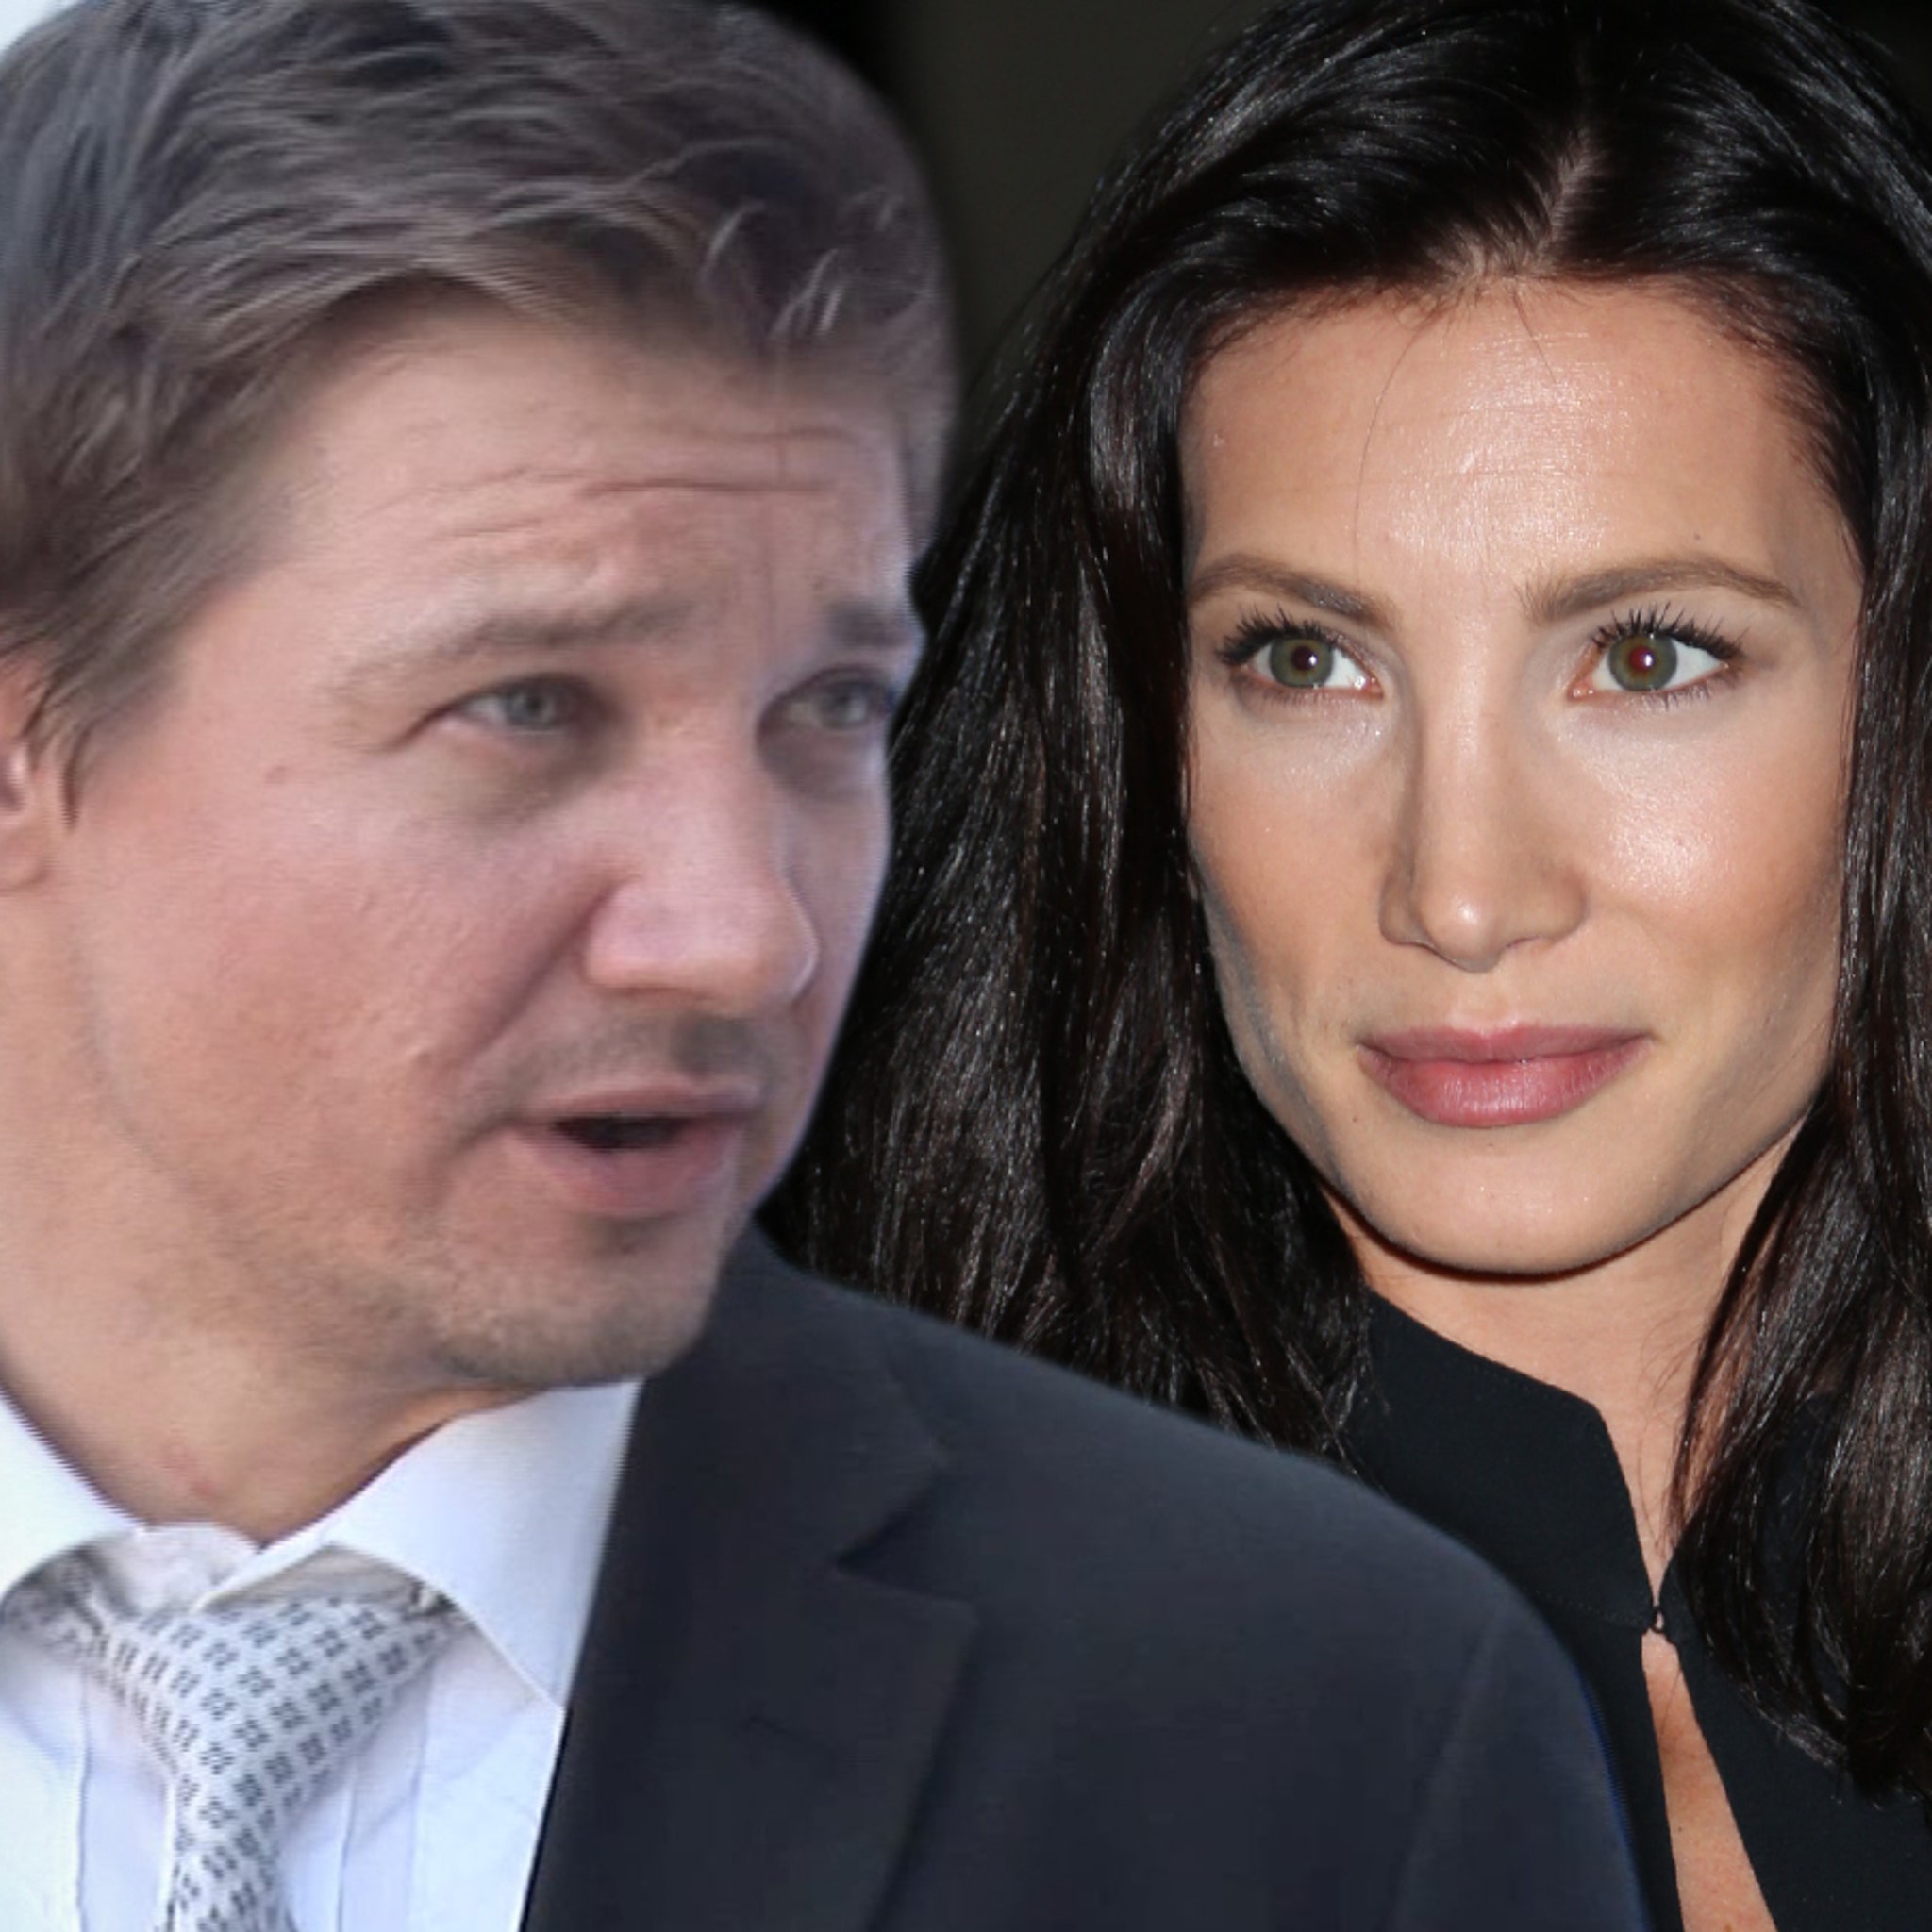 Jeremy Renner Claims Ex is a Liar with Drug and Mental Health Issues image